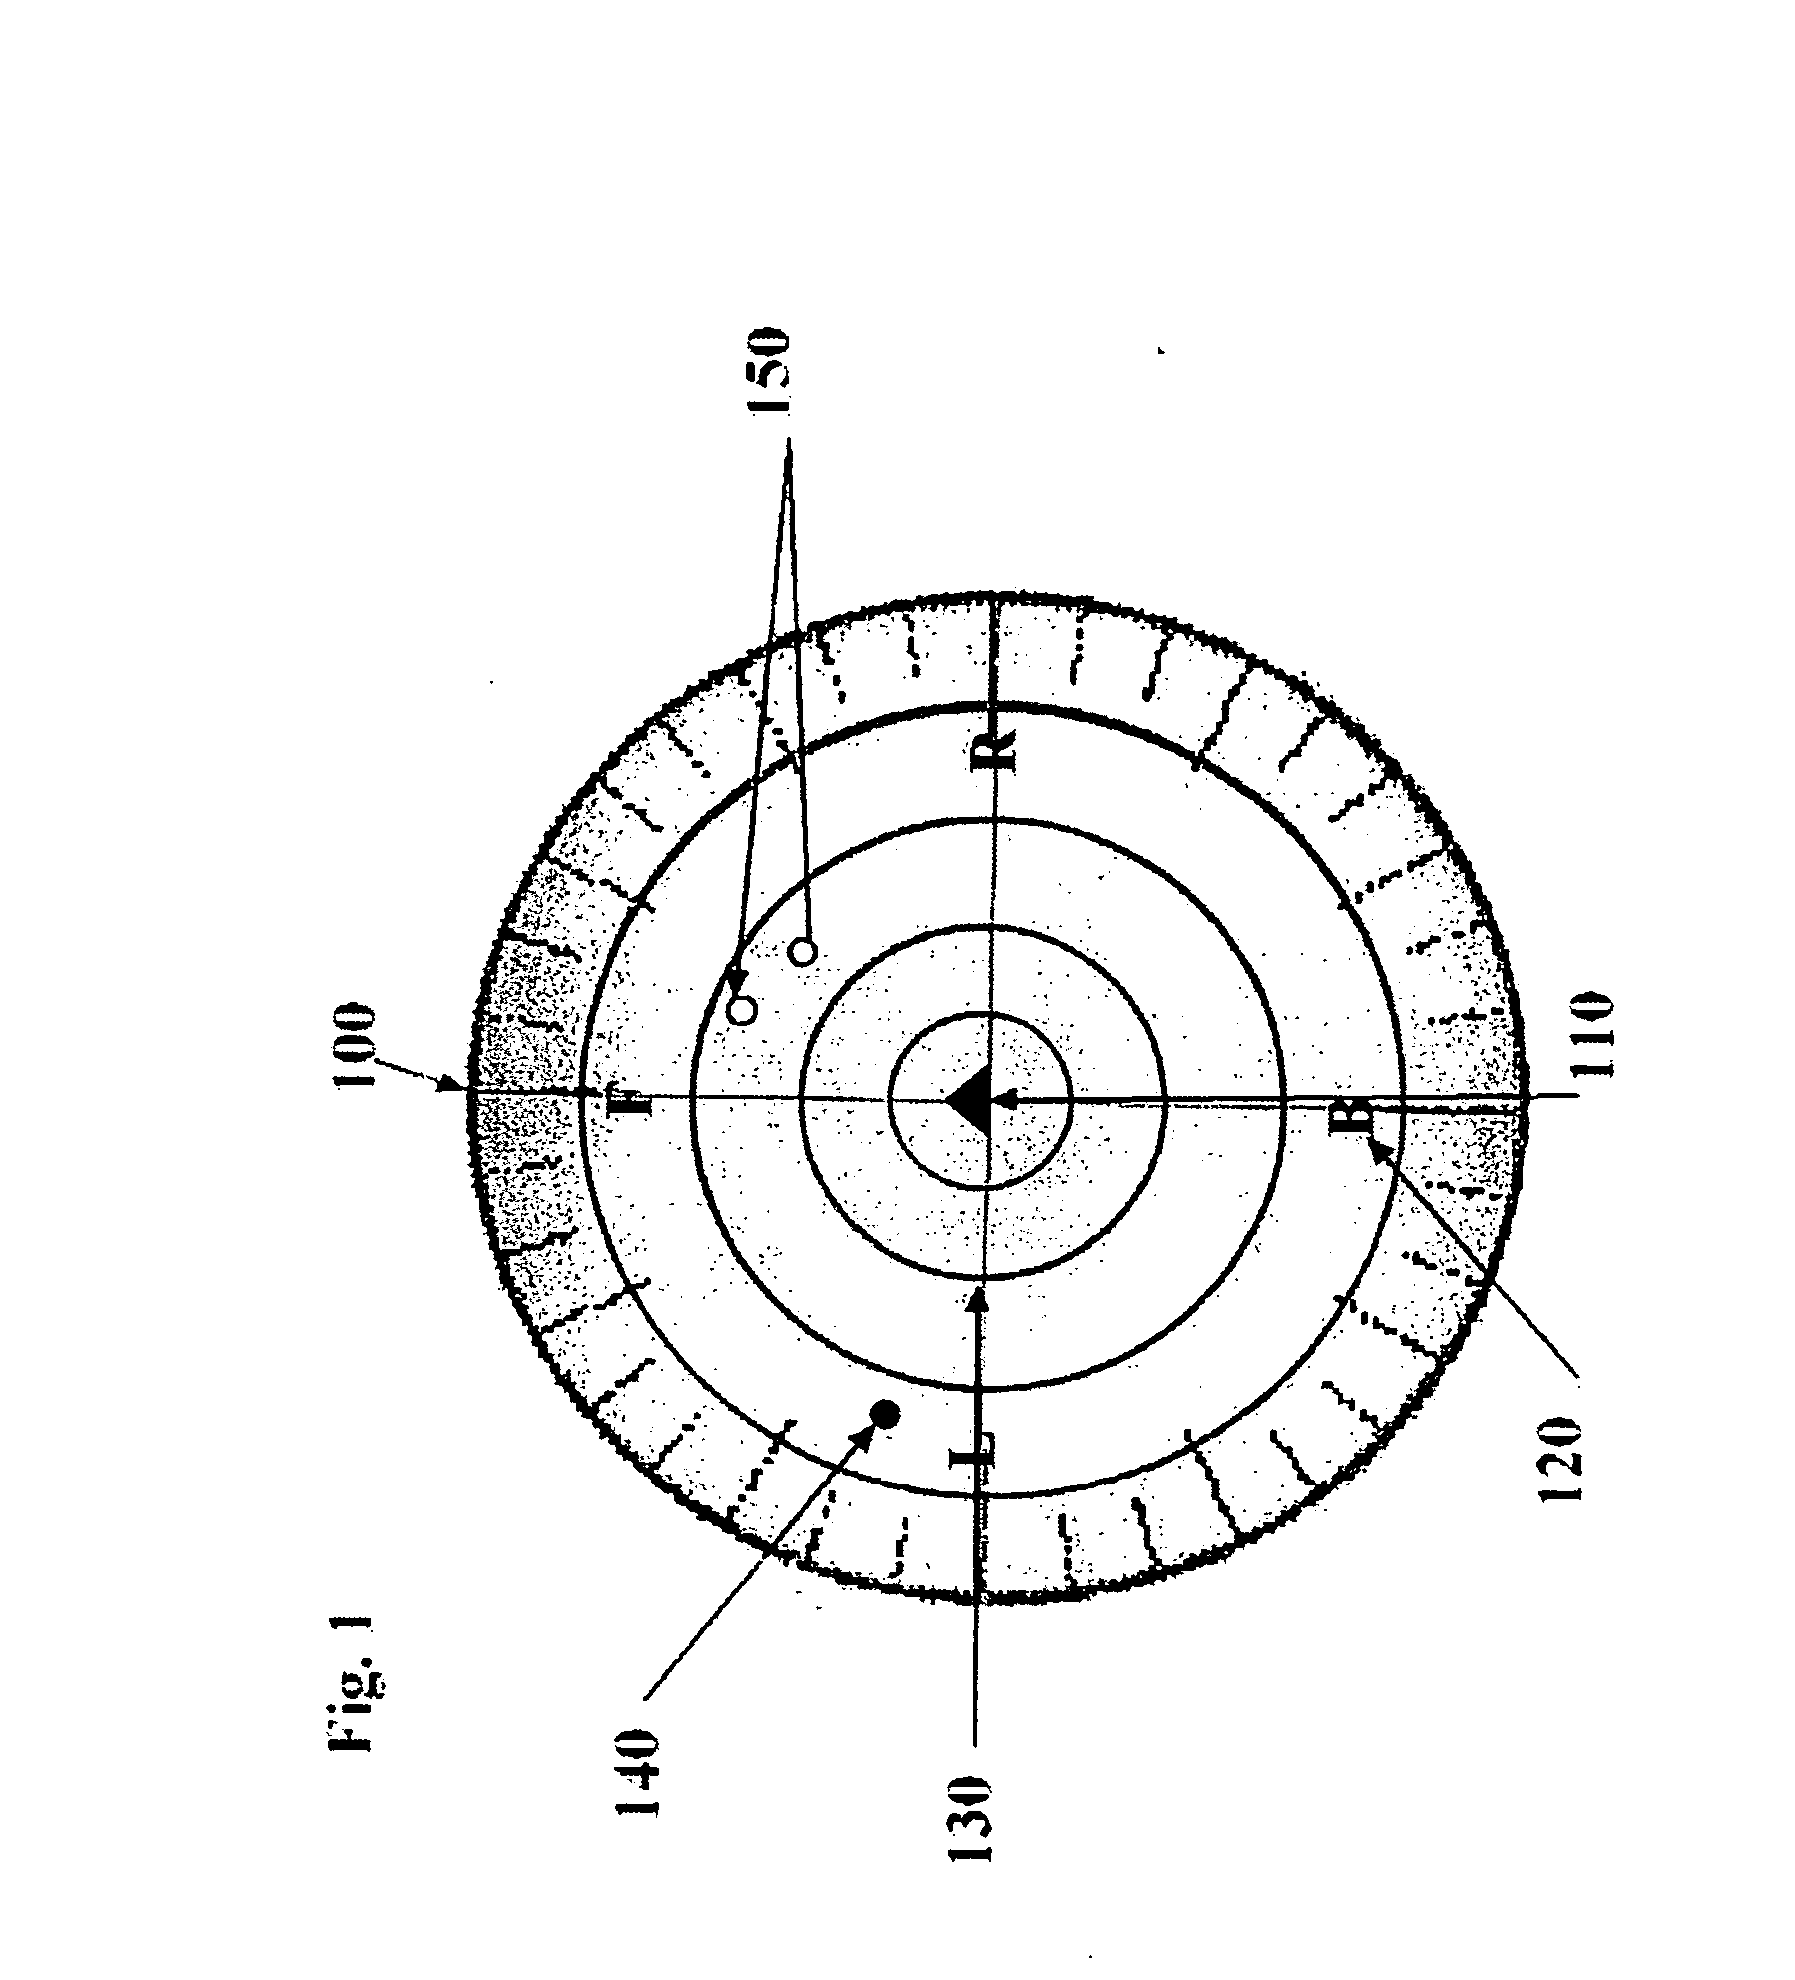 System and method for generate and update real time navigation waypoint automatically